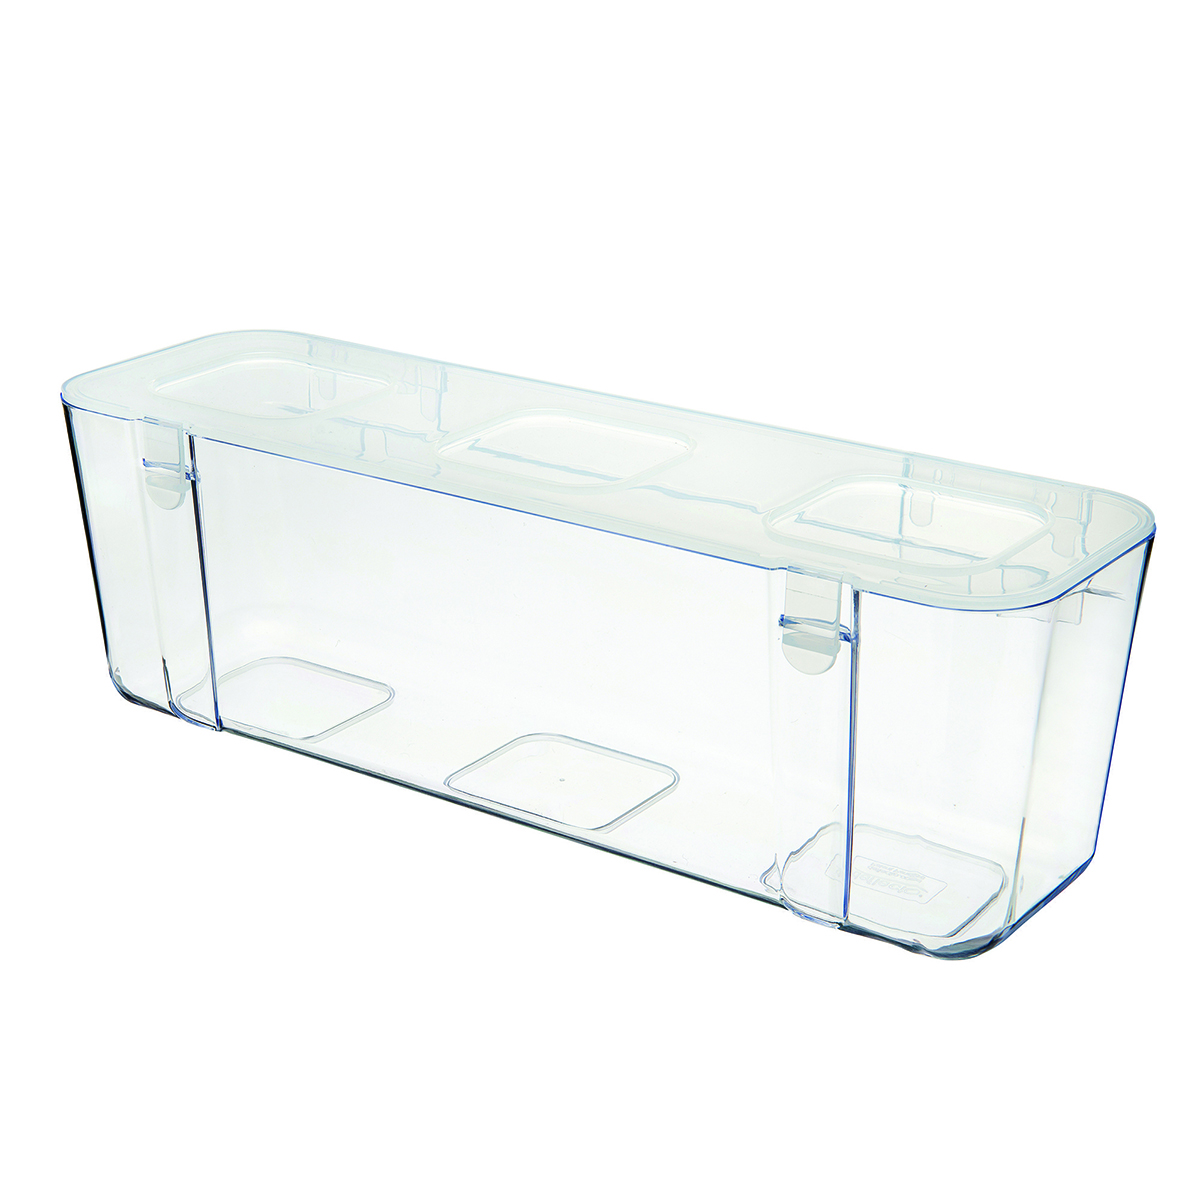 https://www.containerstore.com/catalogimages/392545/10080745-Deflecto-Large-Caddy-BIn-VE.jpg